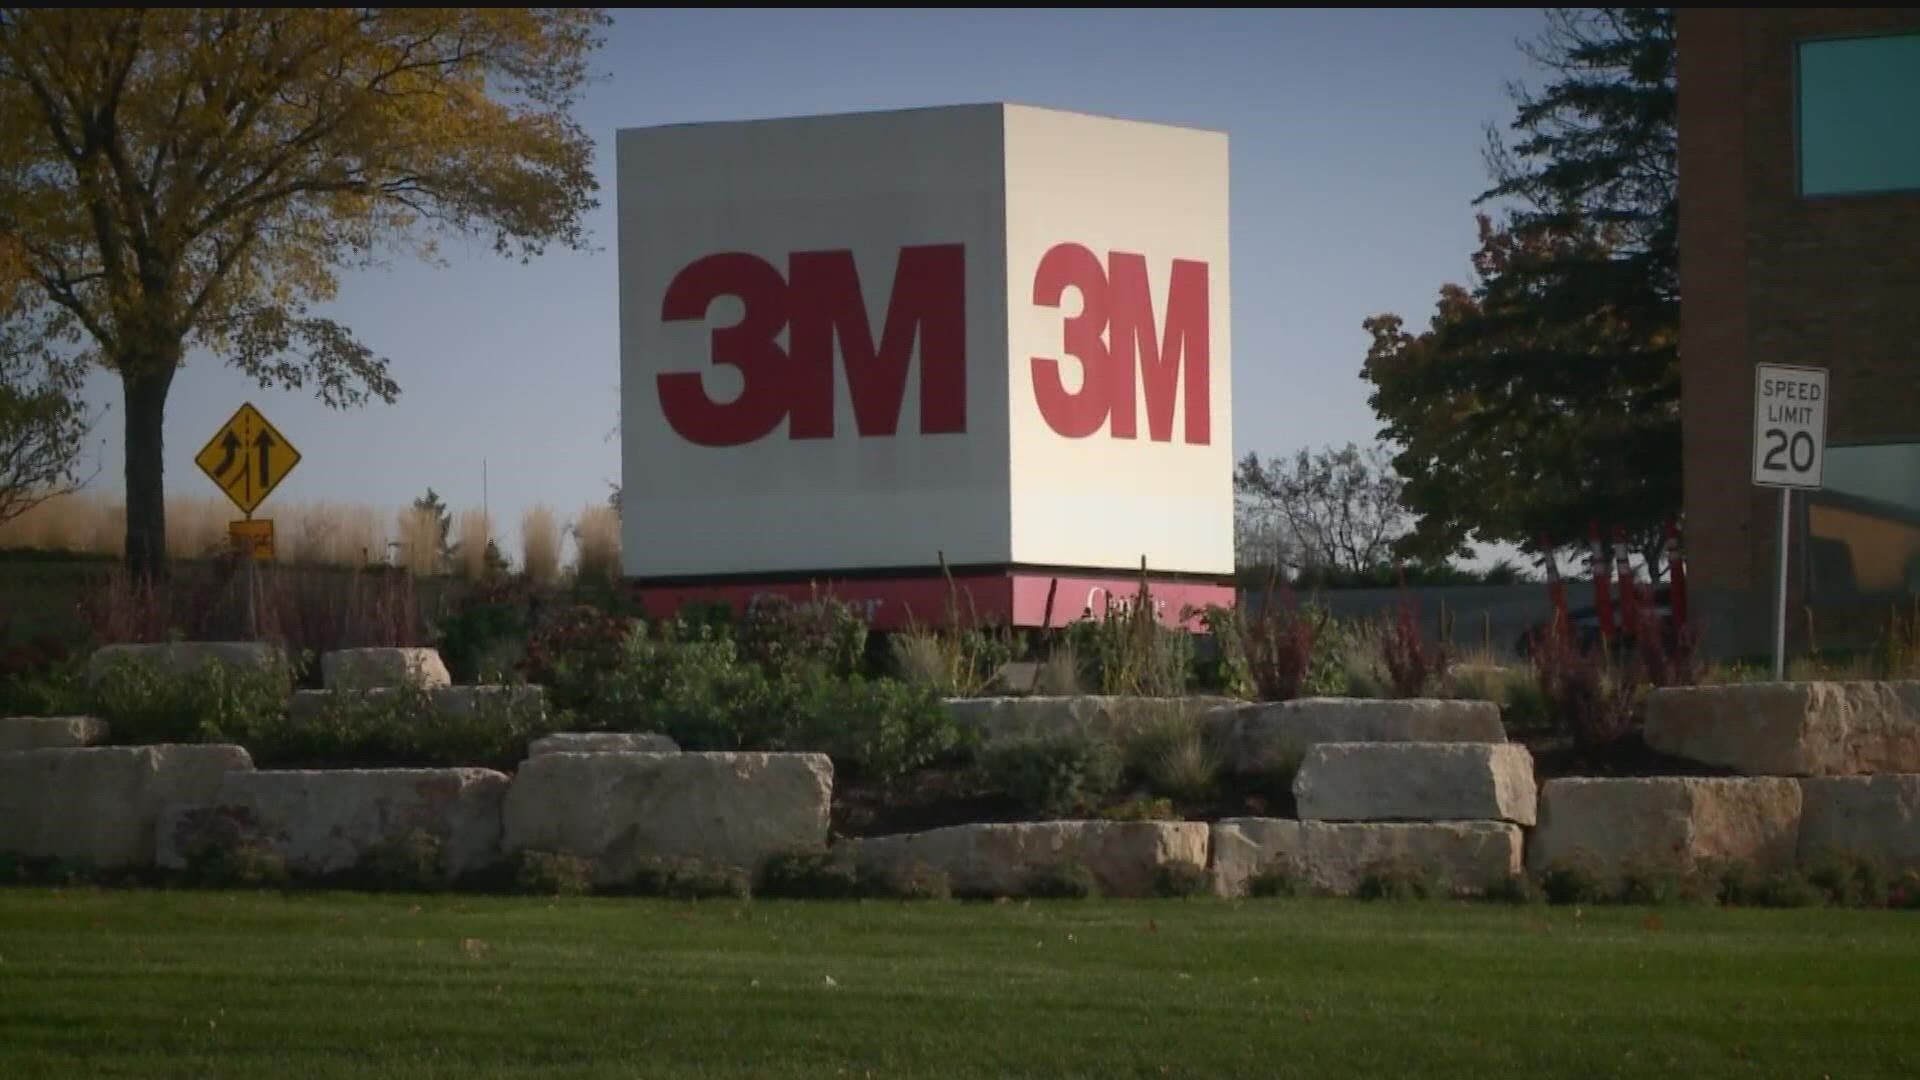 Bloomberg reported that 3M may be cutting jobs, although it's not clear when that will happen or how many positions might be at risk.